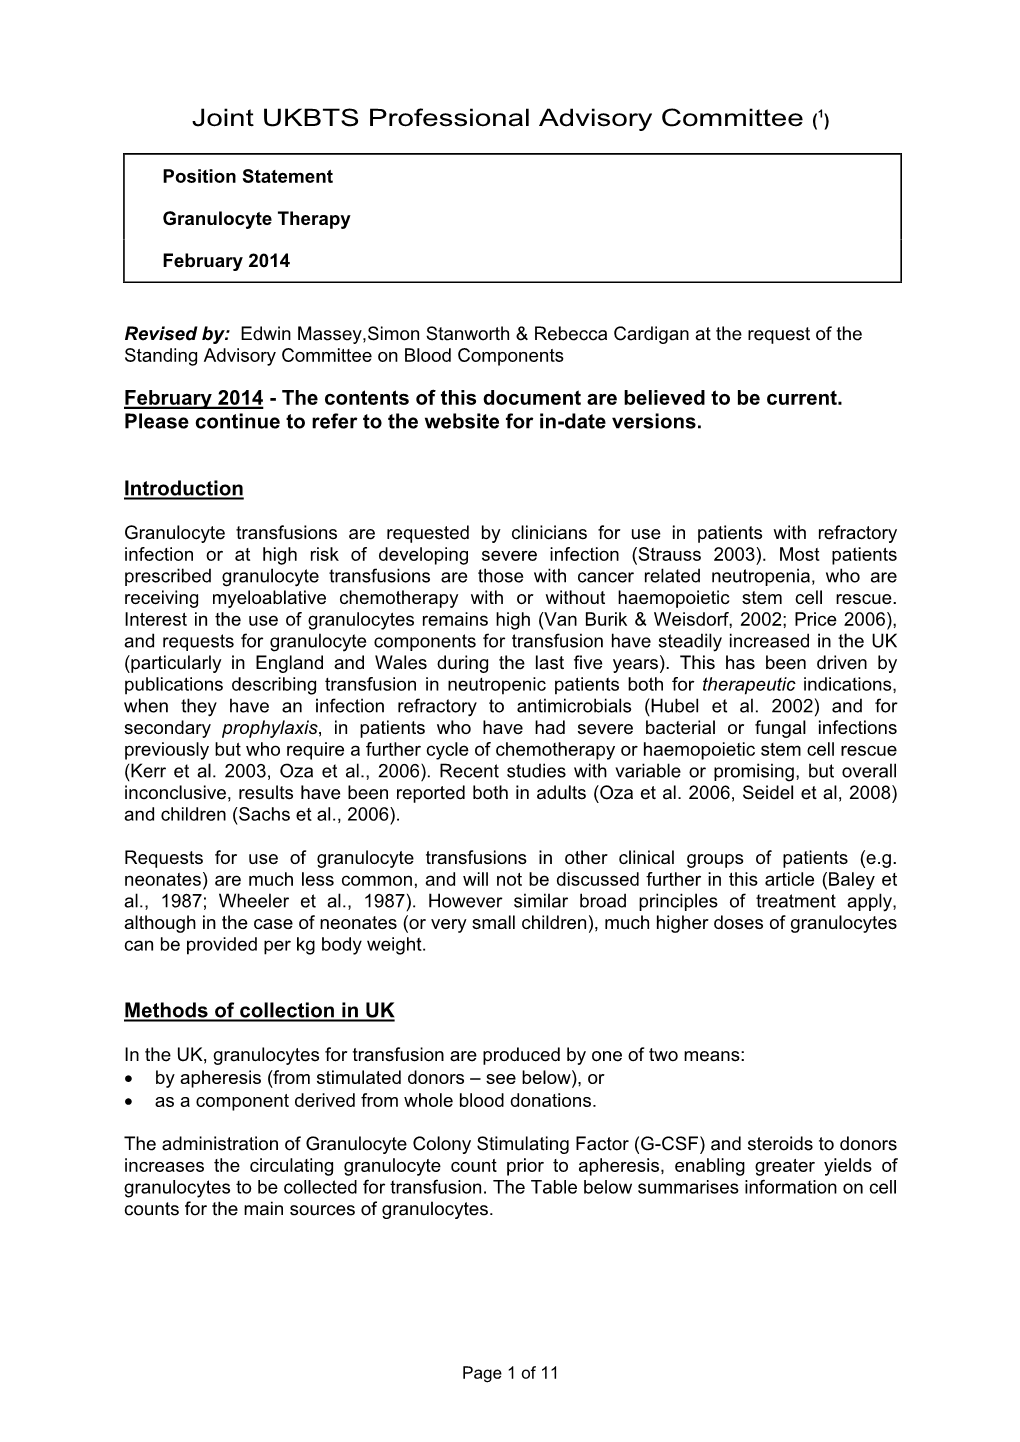 Position Statement on Granulocyte Therapy February 2014